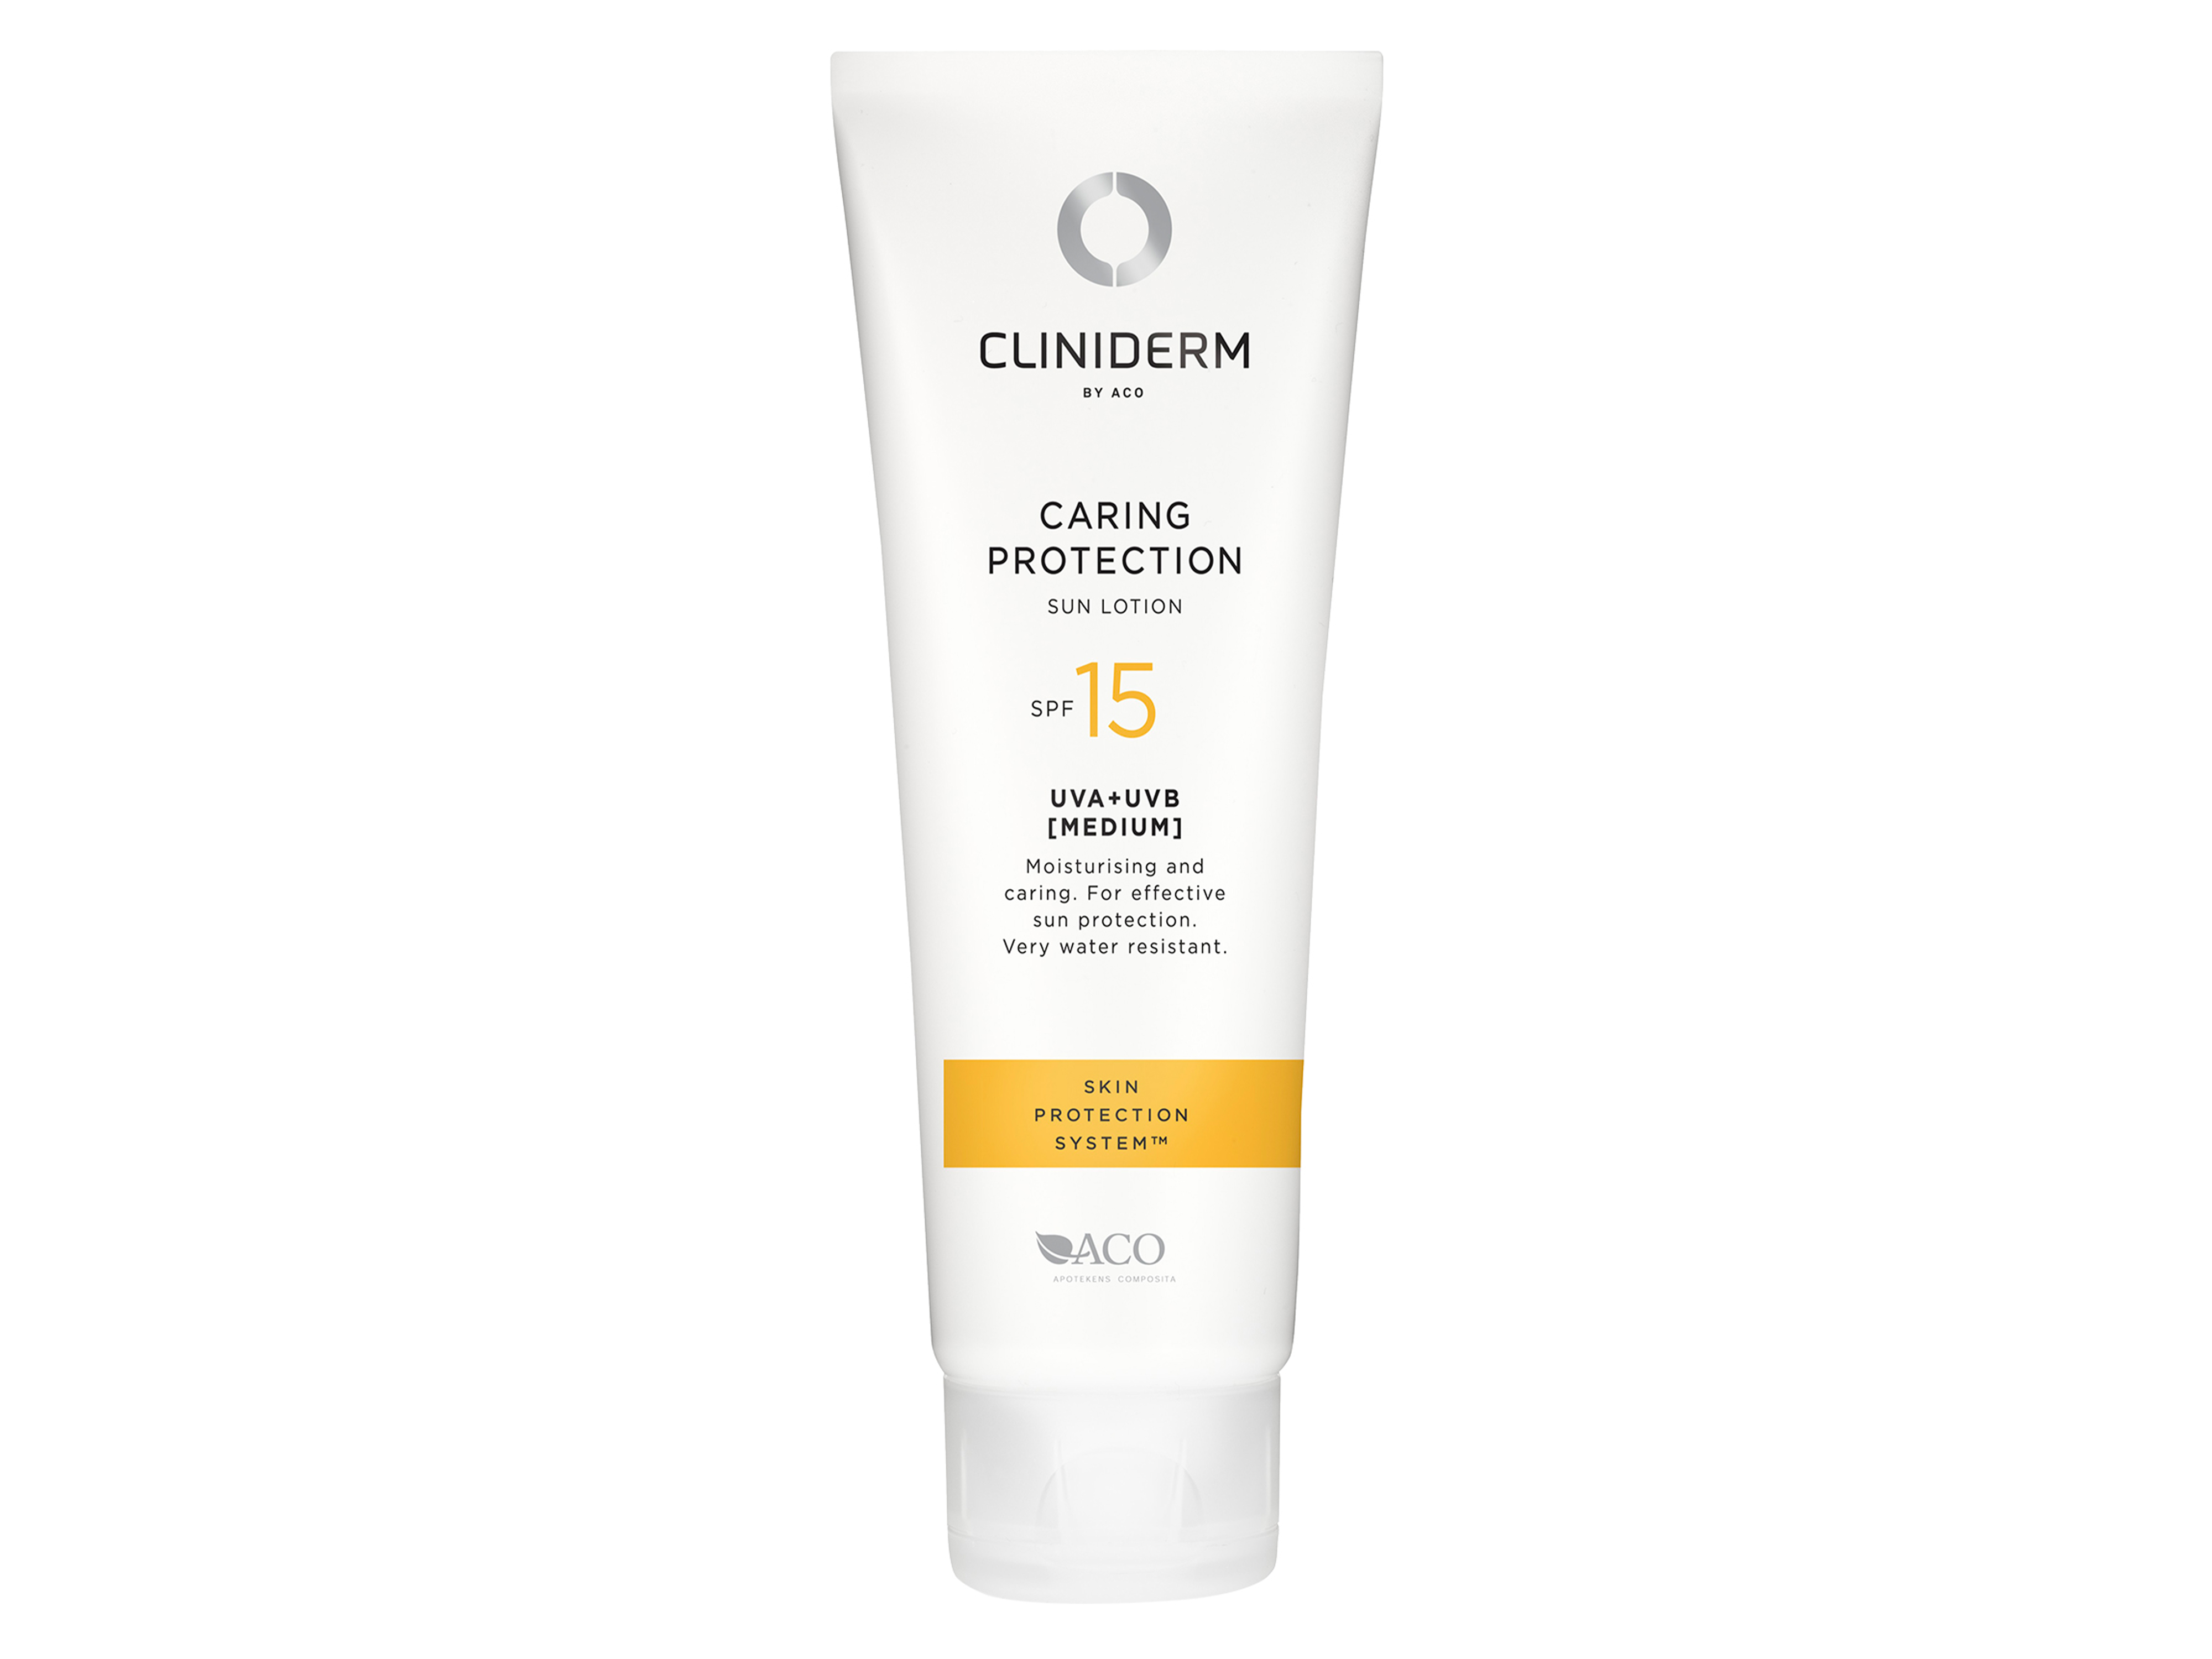 Cliniderm Sun Lotion Caring Protection, SPF 15, 125 ml